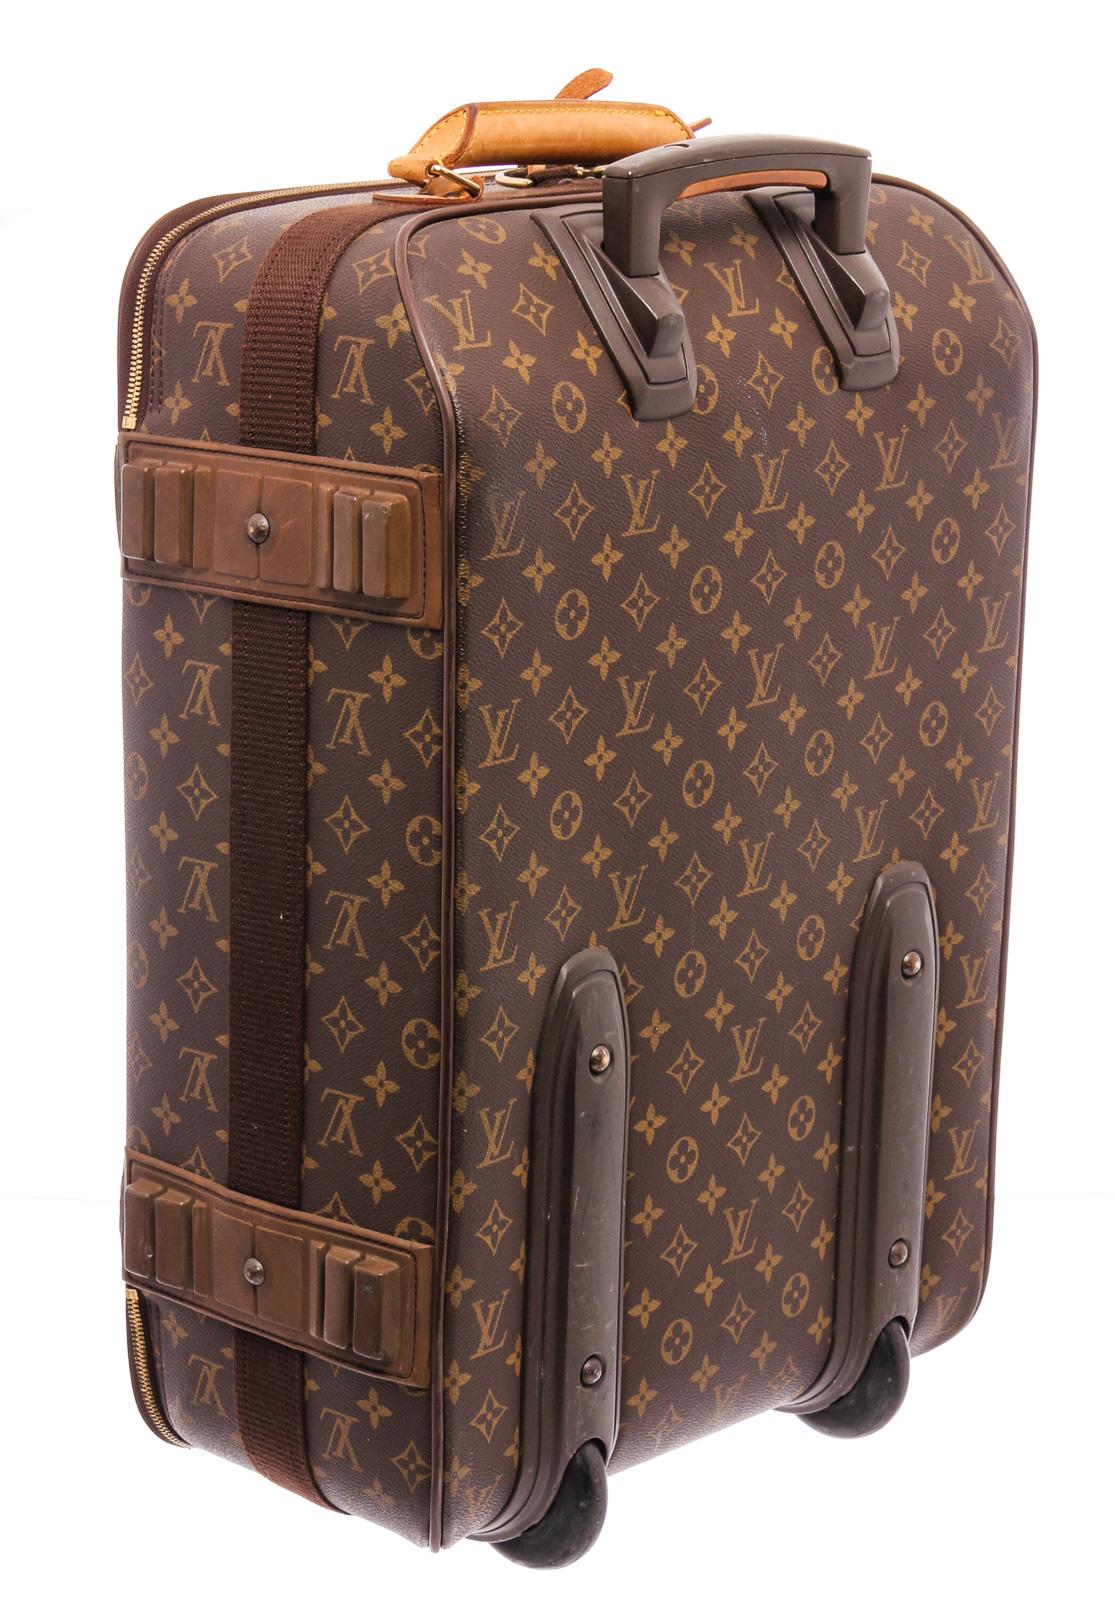 Brown and tan monogram coated canvas Louis Vuitton Pégase 50 with brass hardware, single exterior slip pocket, brown nylon lining, compression straps at interior, leather button hanger straps tan vachetta leather trim, single flat top handle,